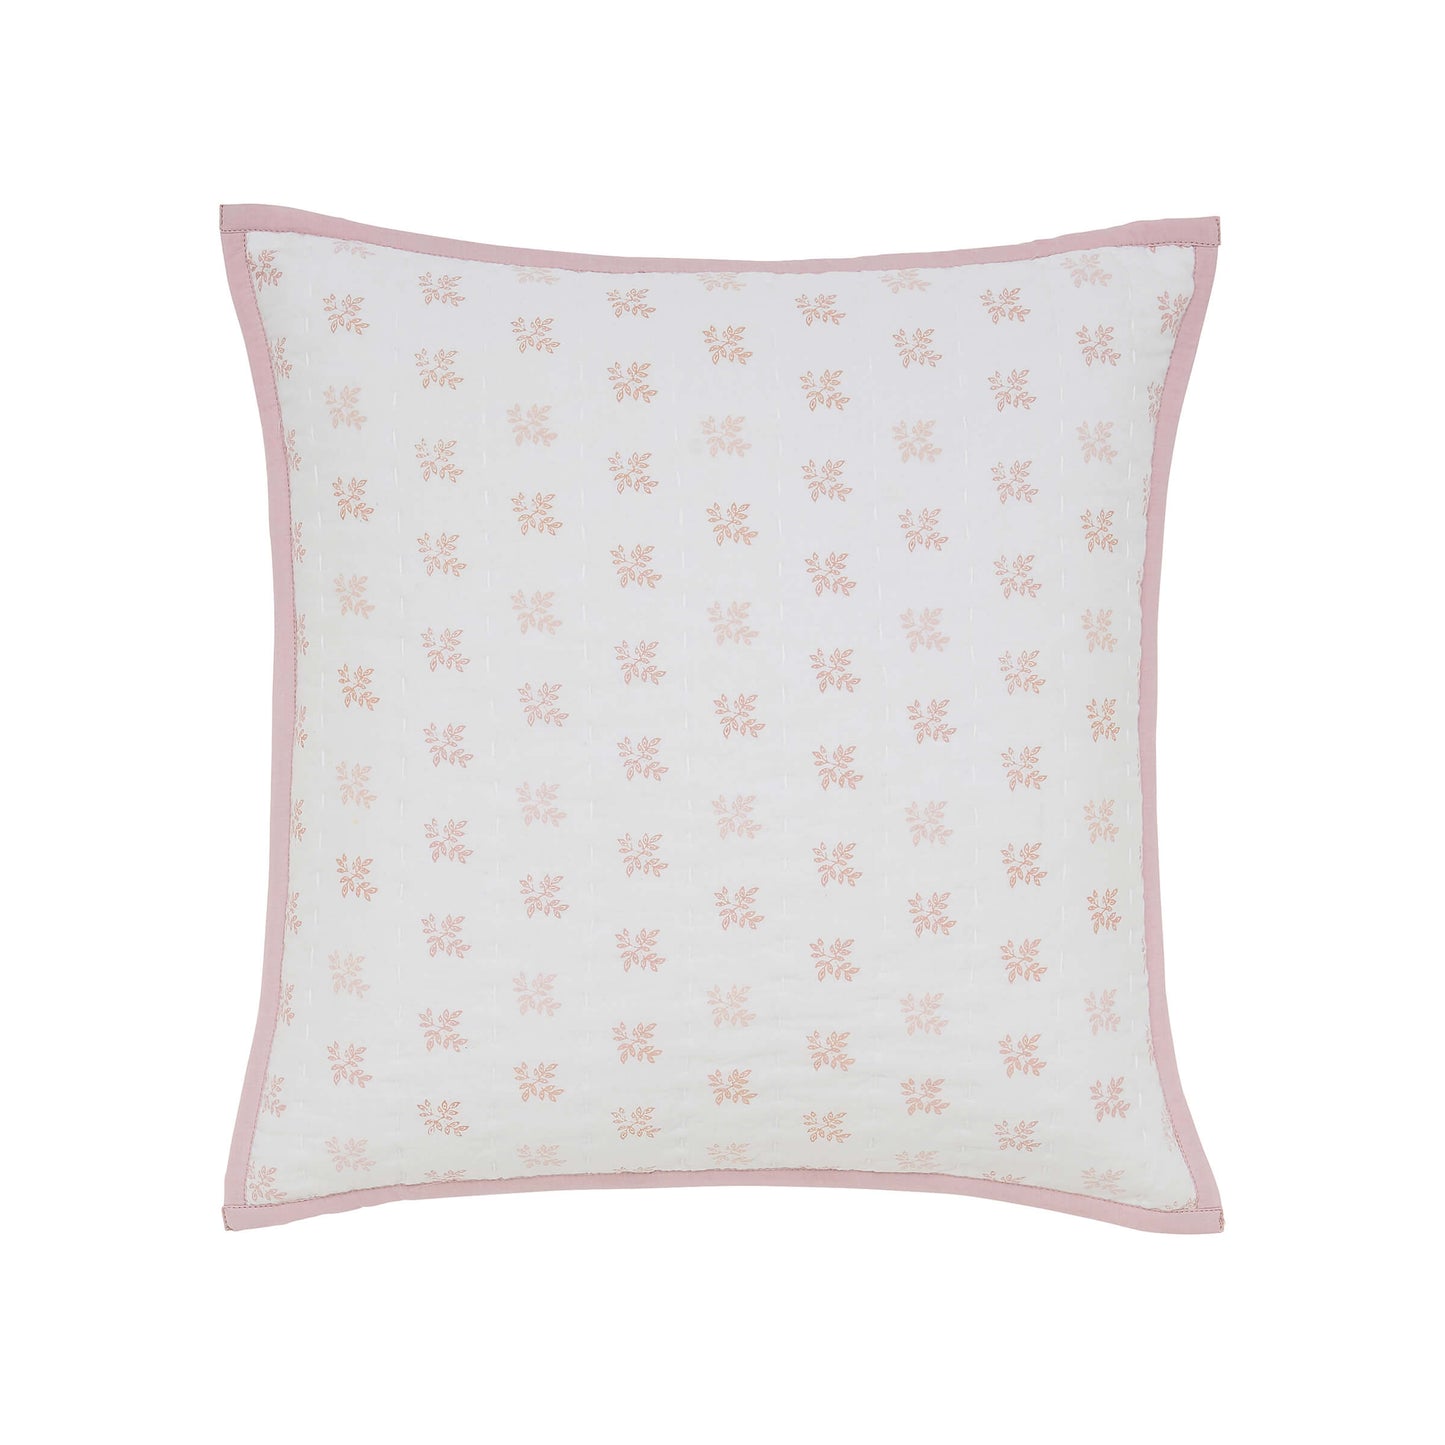 Gracie Quilted Cushion 40cm x 40cm, Rose Shell & White